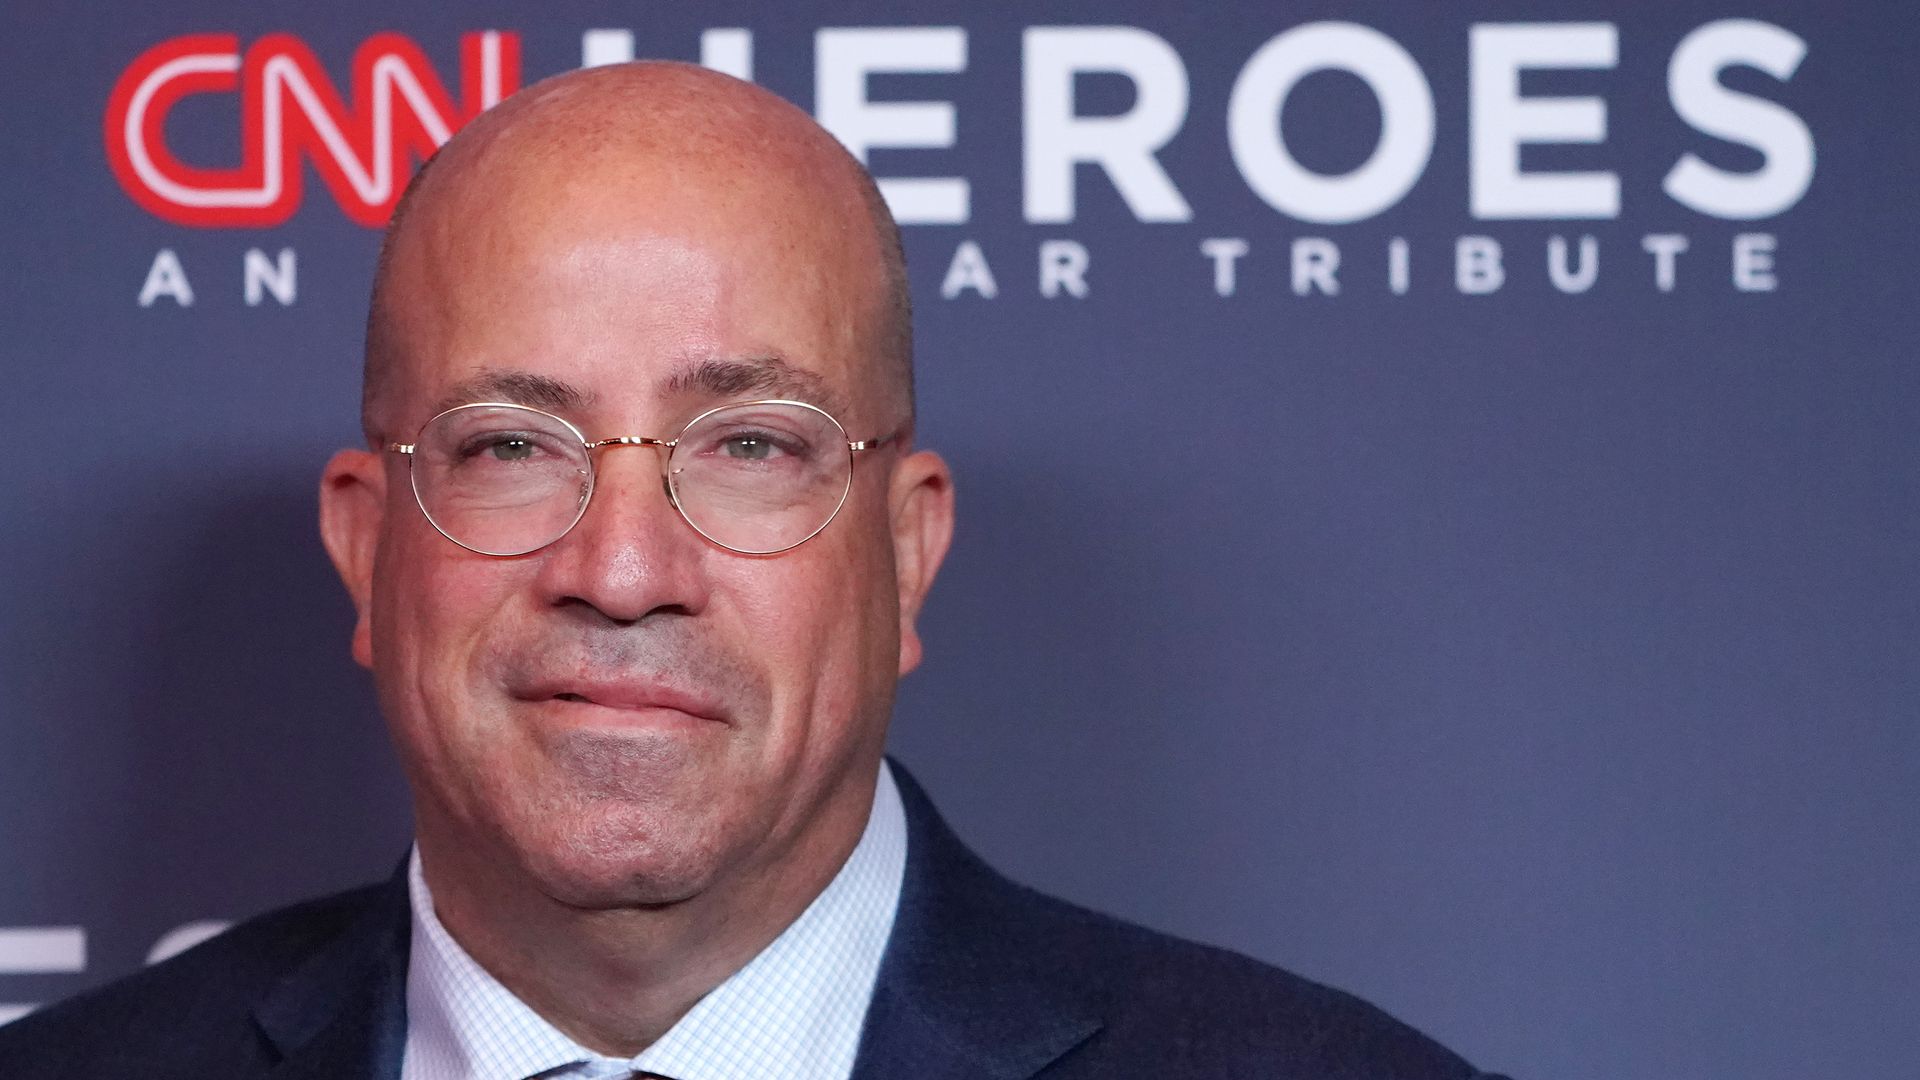 CNN chief Jeff Zucker attends the 13th Annual CNN Heroes at the American Museum of Natural History on December 08, 2019 in New York City. (Photo by J. Countess/Getty Images)